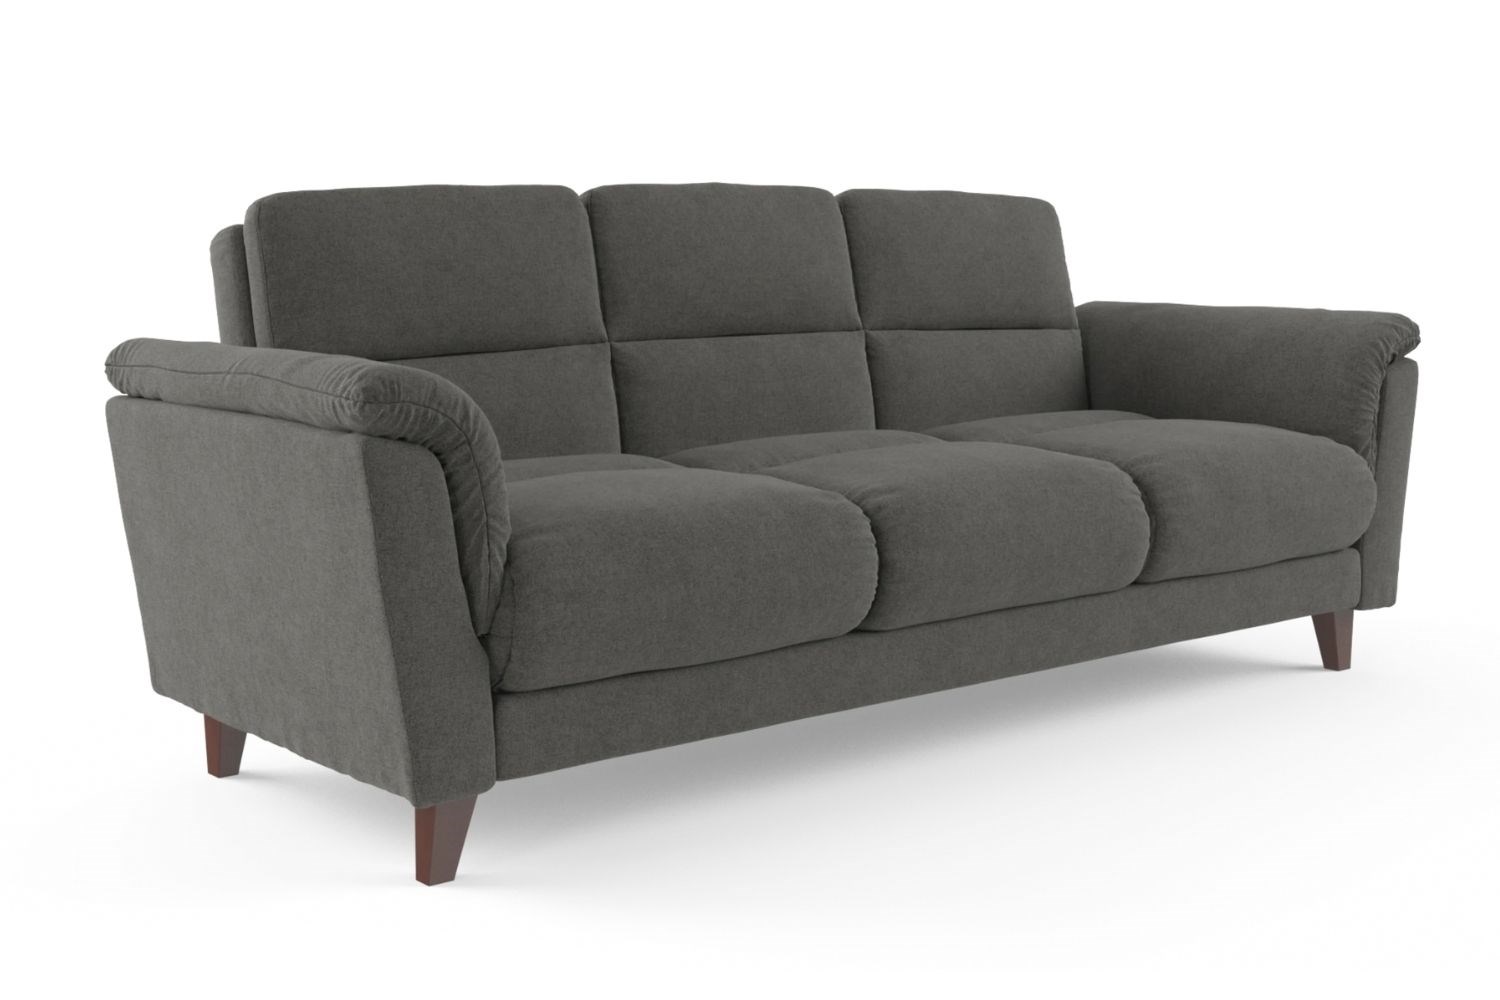 chinese sofa bed sale